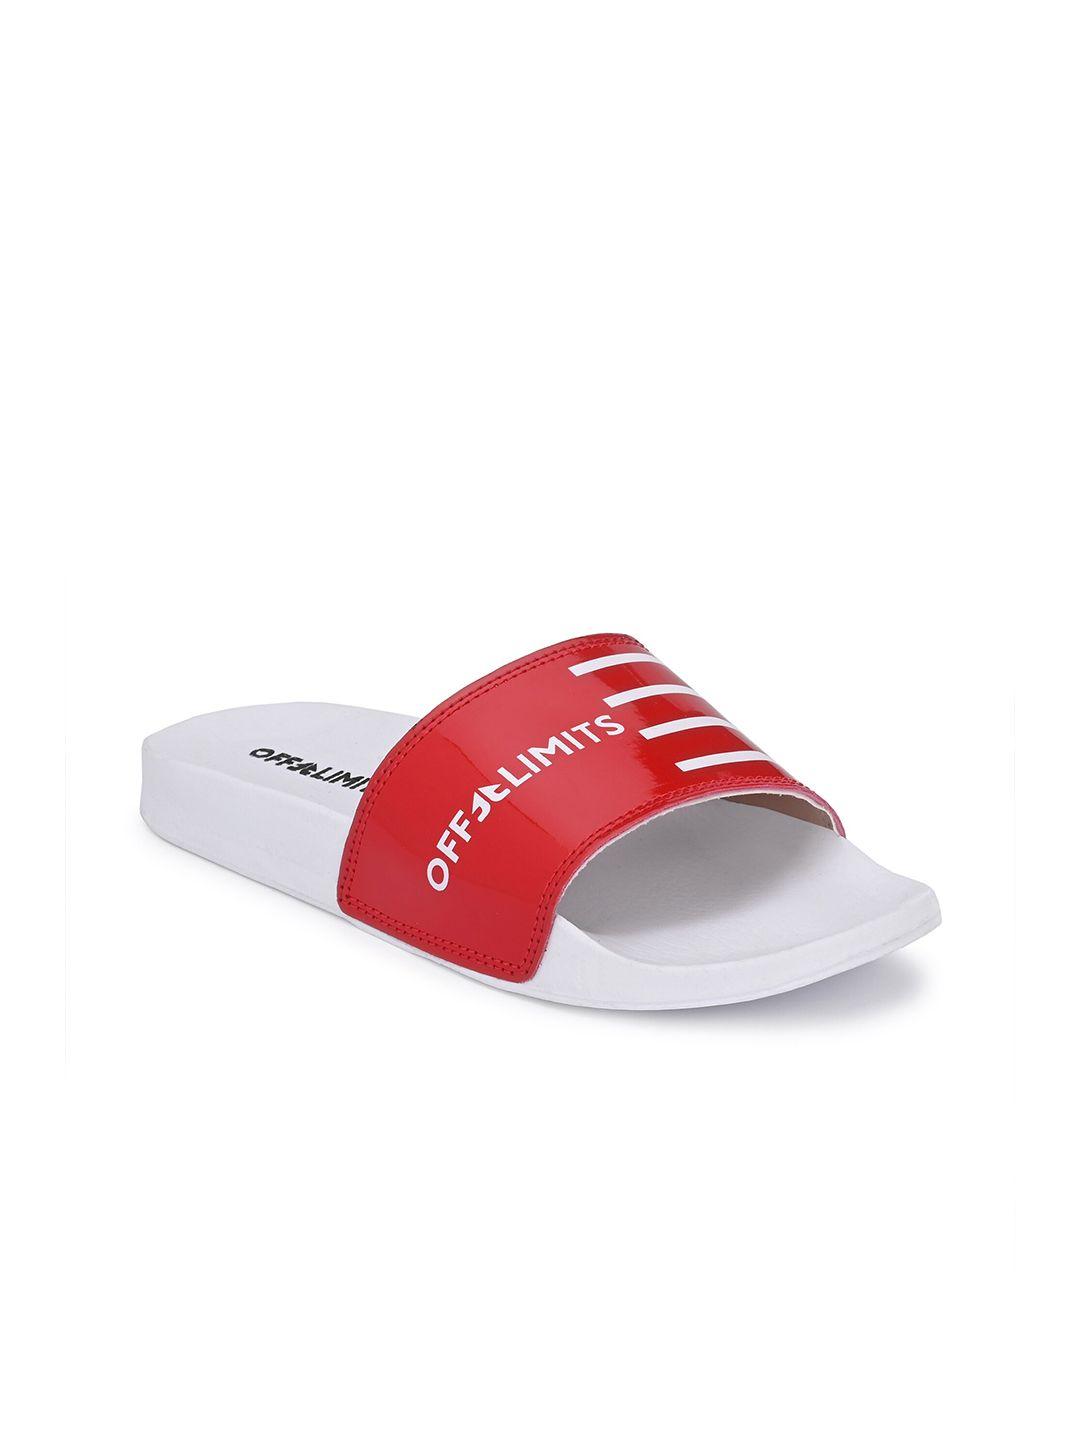 off limits women red & white printed sliders